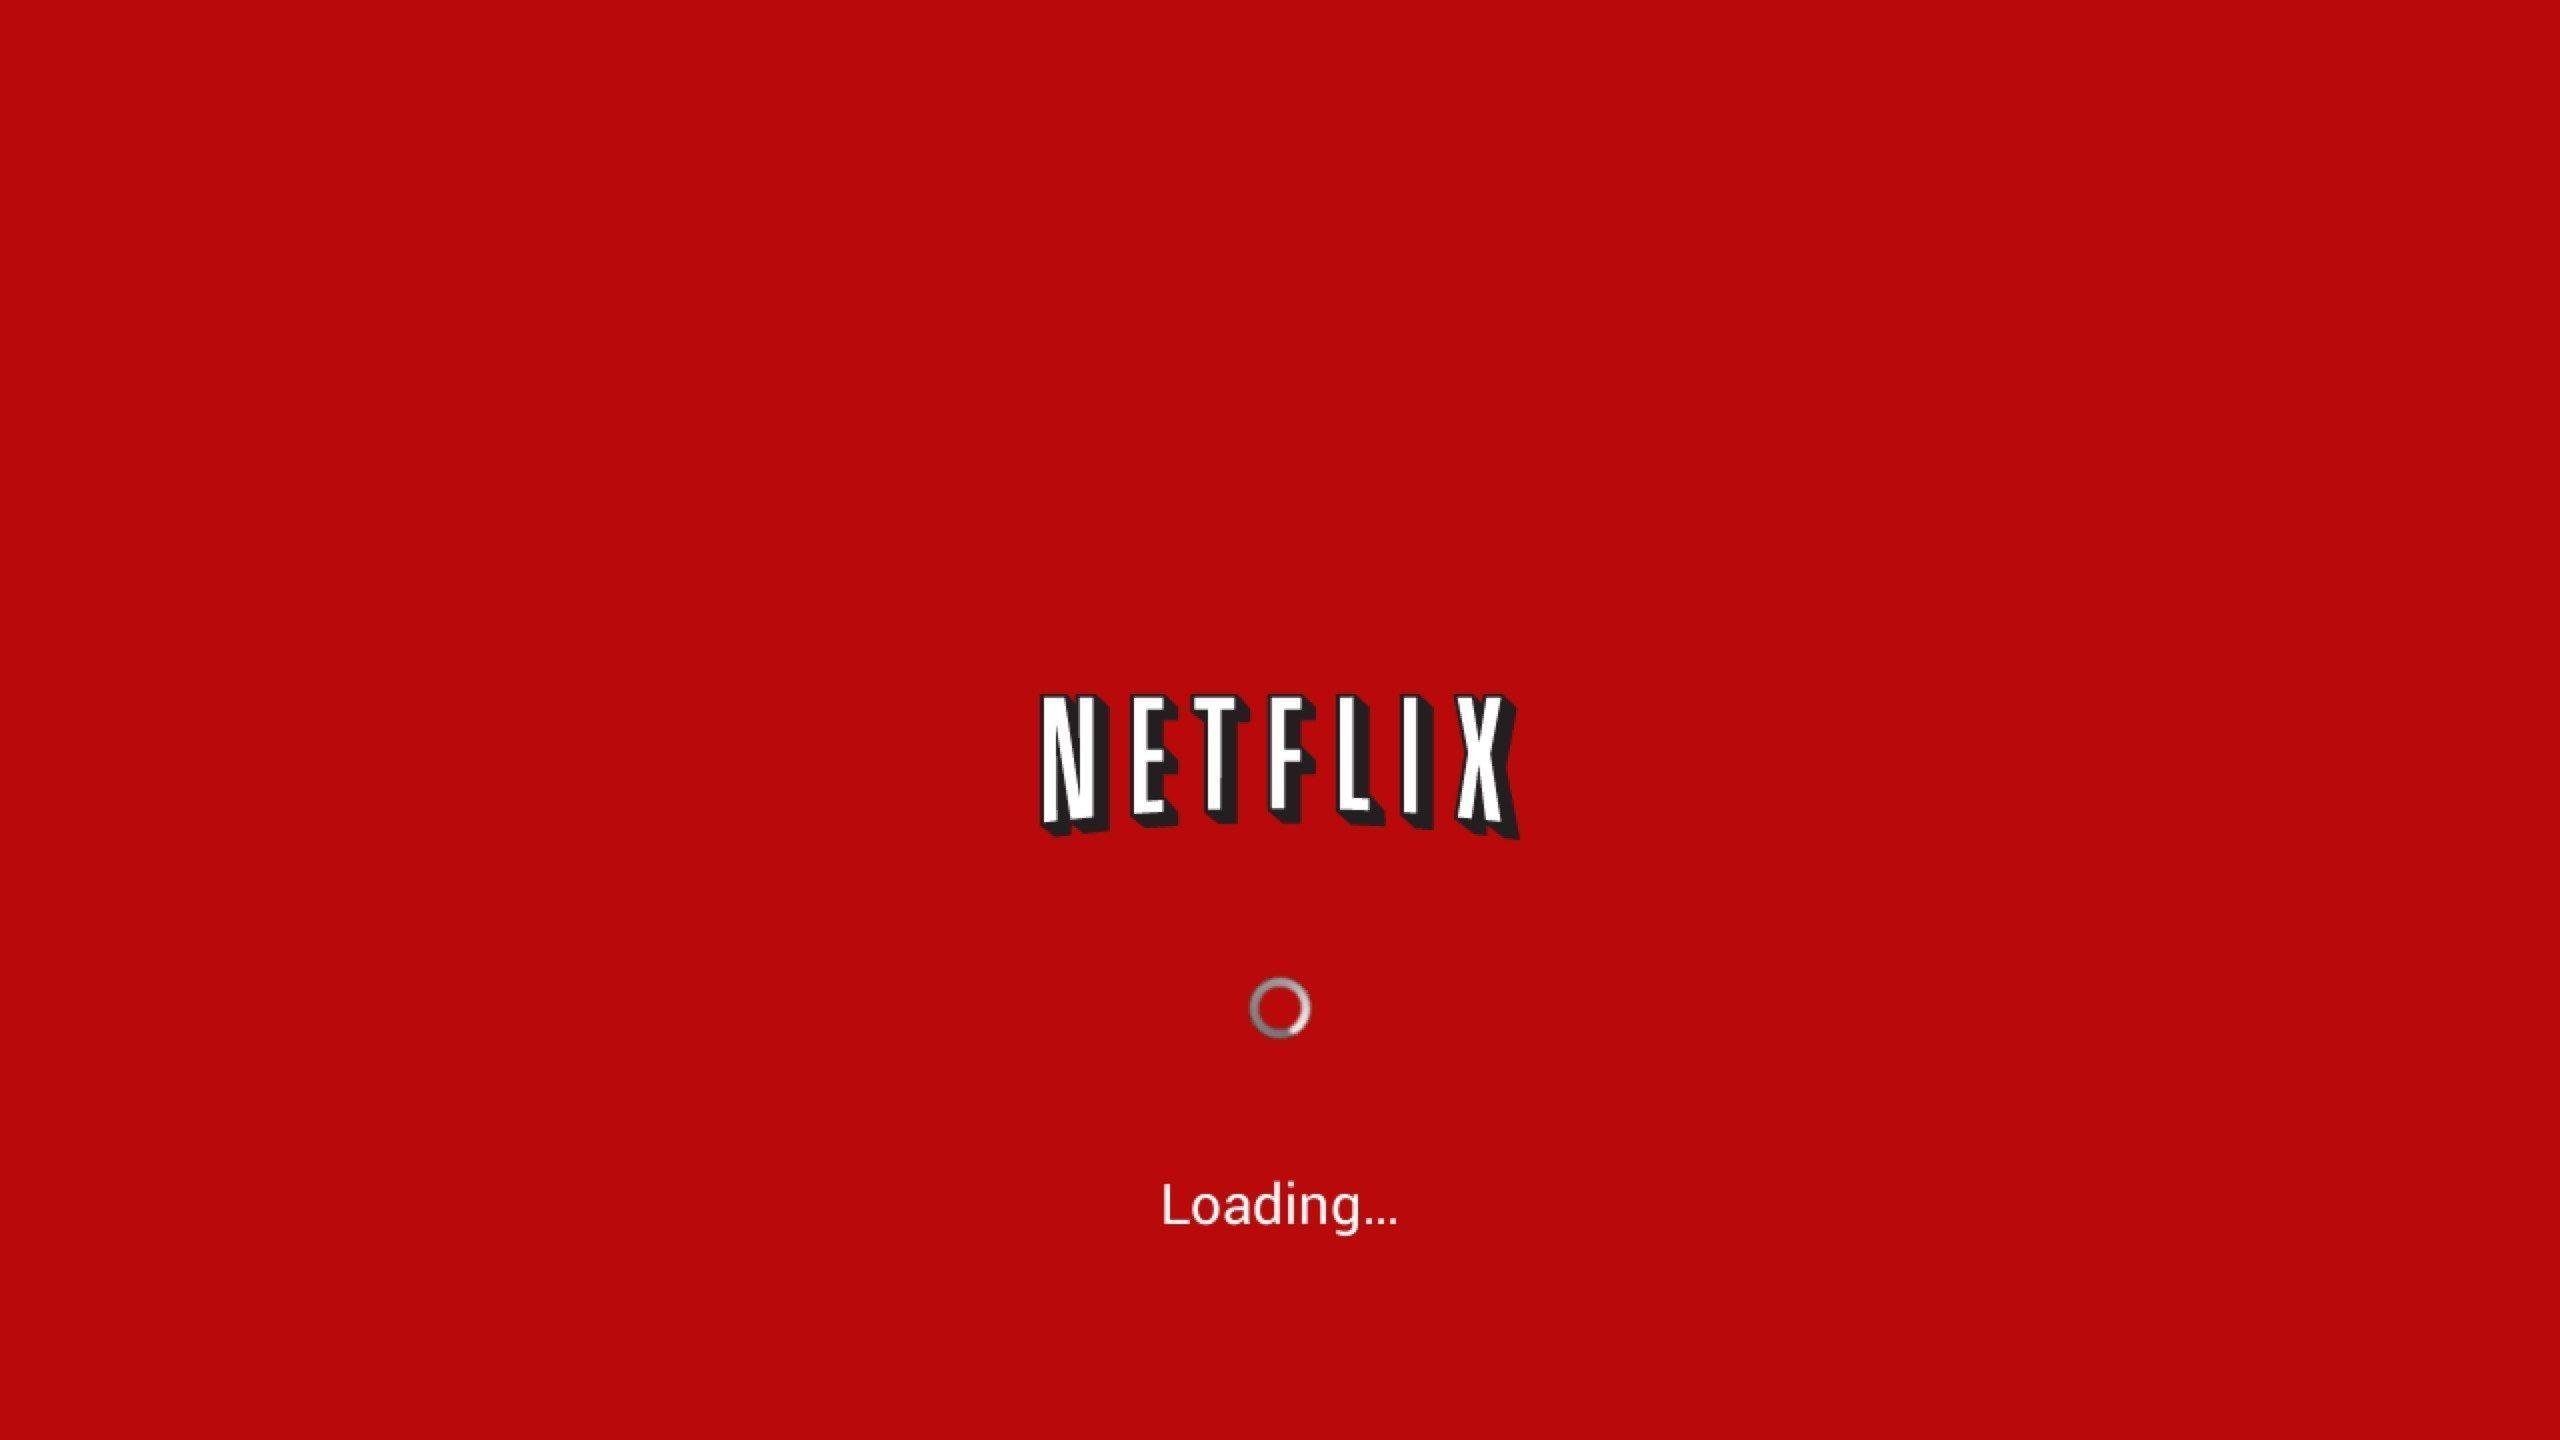 Netflix loading screen with the word 